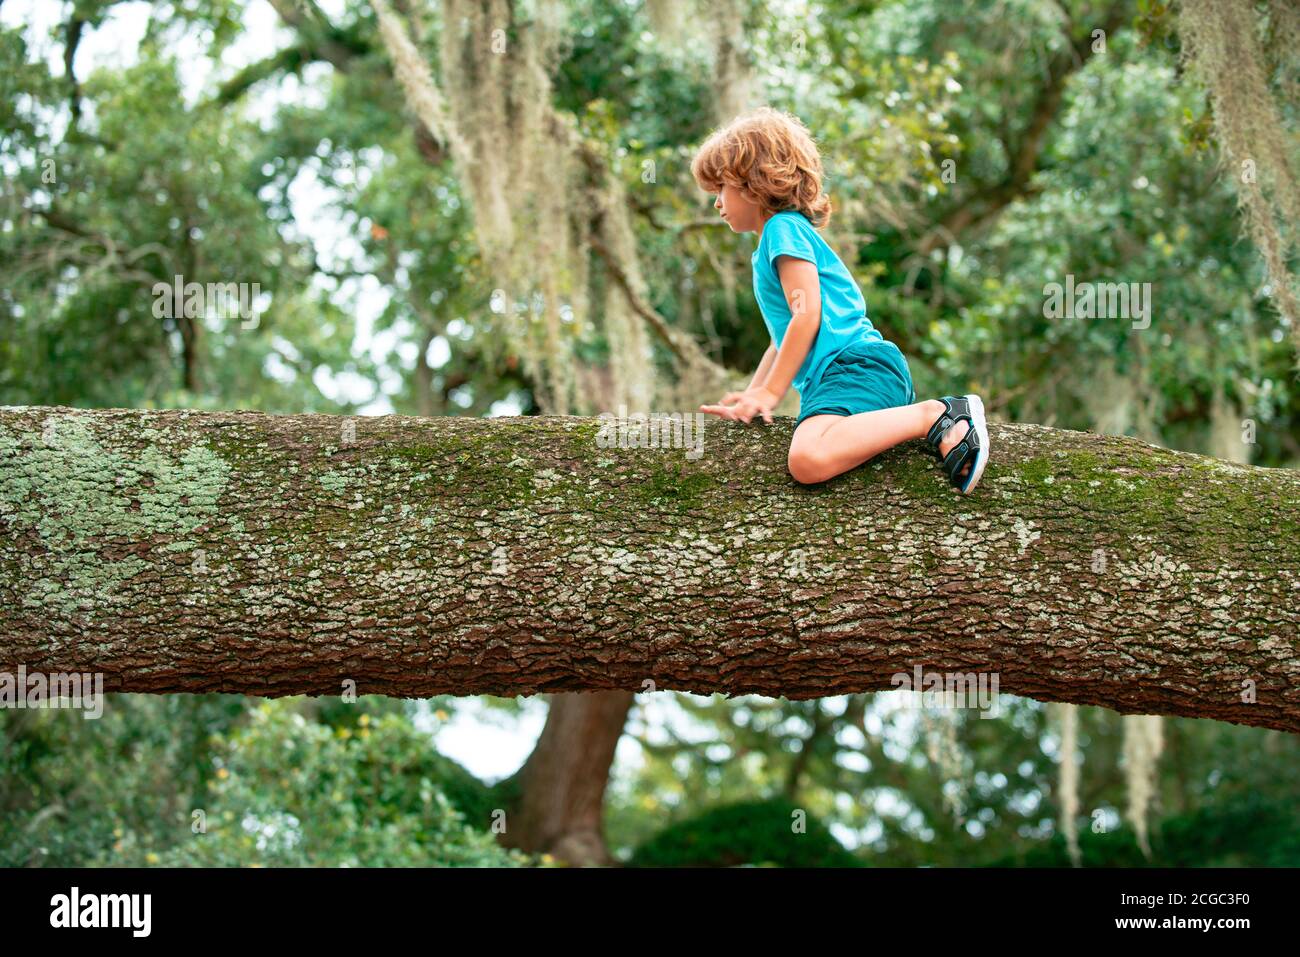 Kids climbing trees. Young boy Child having fun in the park. Stock Photo